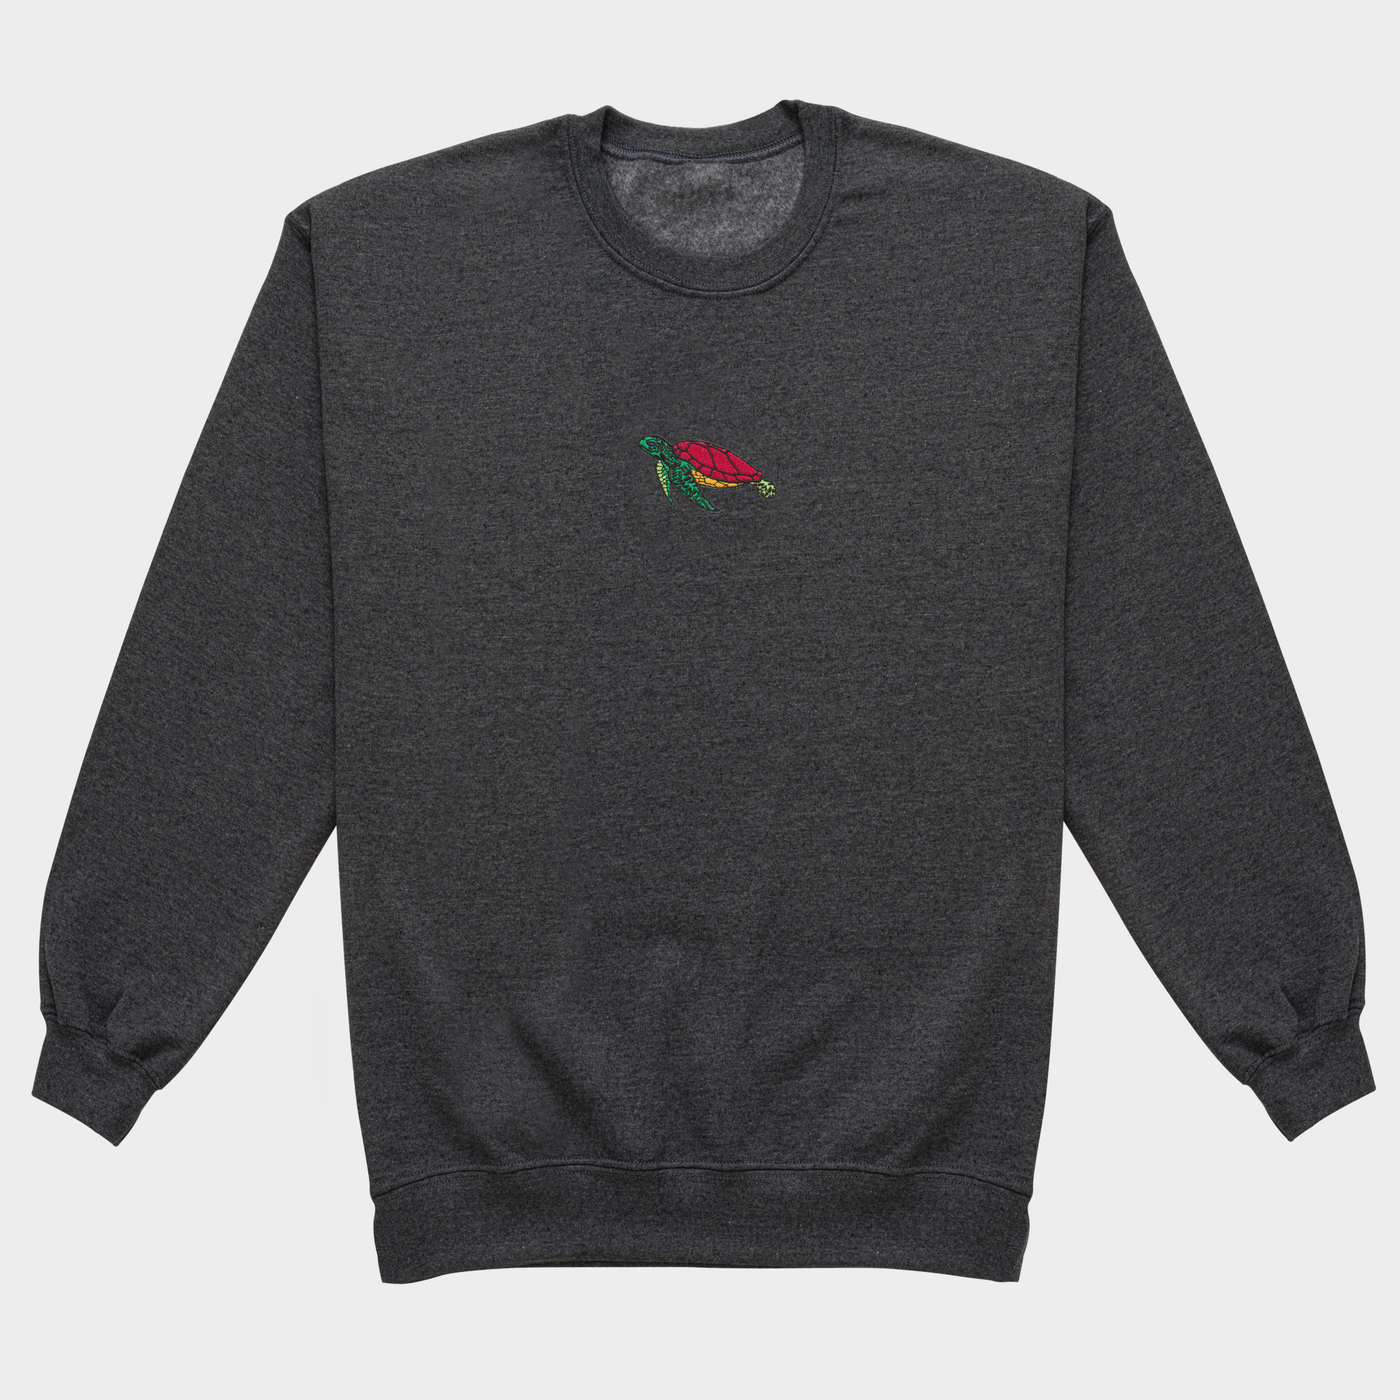 Bobby's Planet Men's Embroidered Sea Turtle Sweatshirt from Seven Seas Fish Animals Collection in Dark Grey Heather Color#color_dark-grey-heather